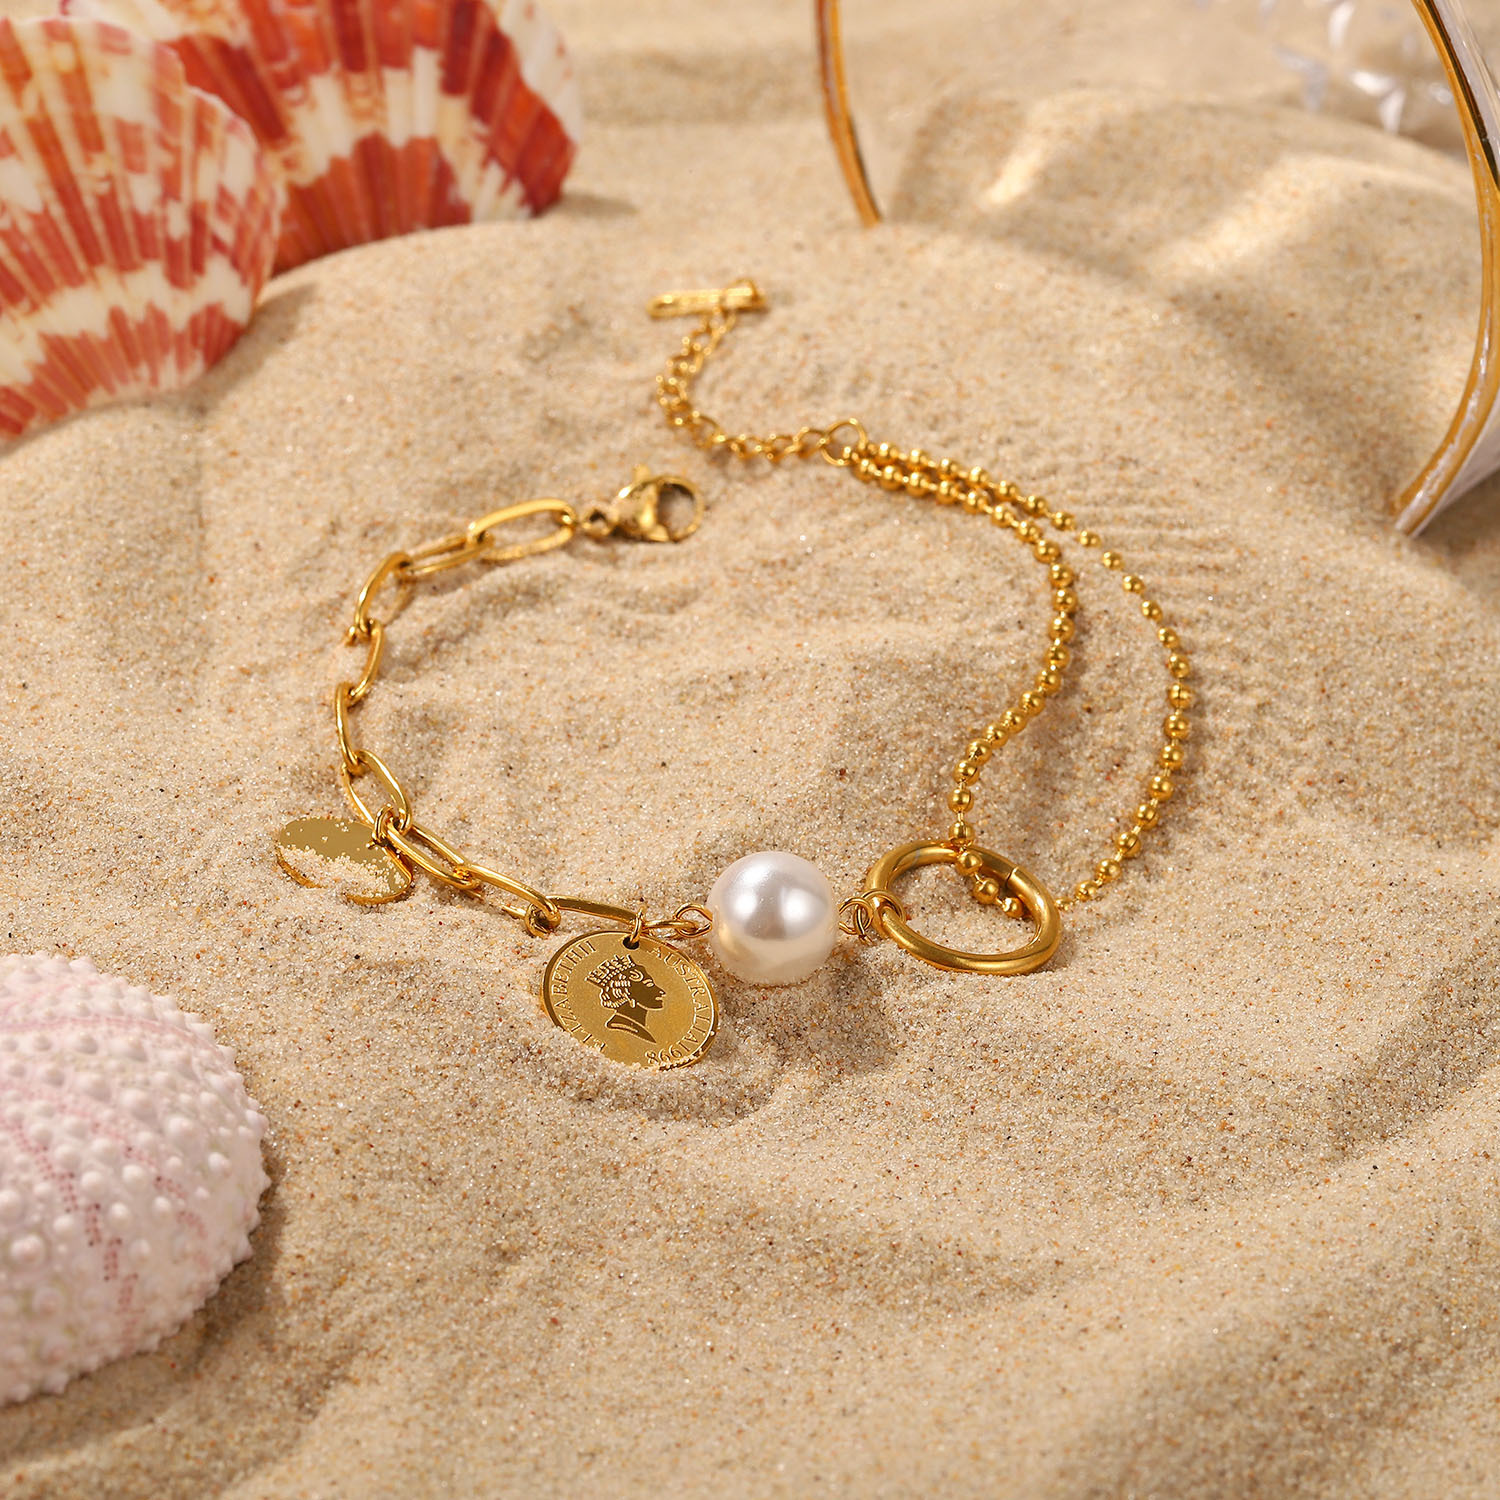 Retro style stainless steel 18K Gold plated Elizabeth Coin Pendant Pearl Ball Bead Chain Stitching Braceletpicture6